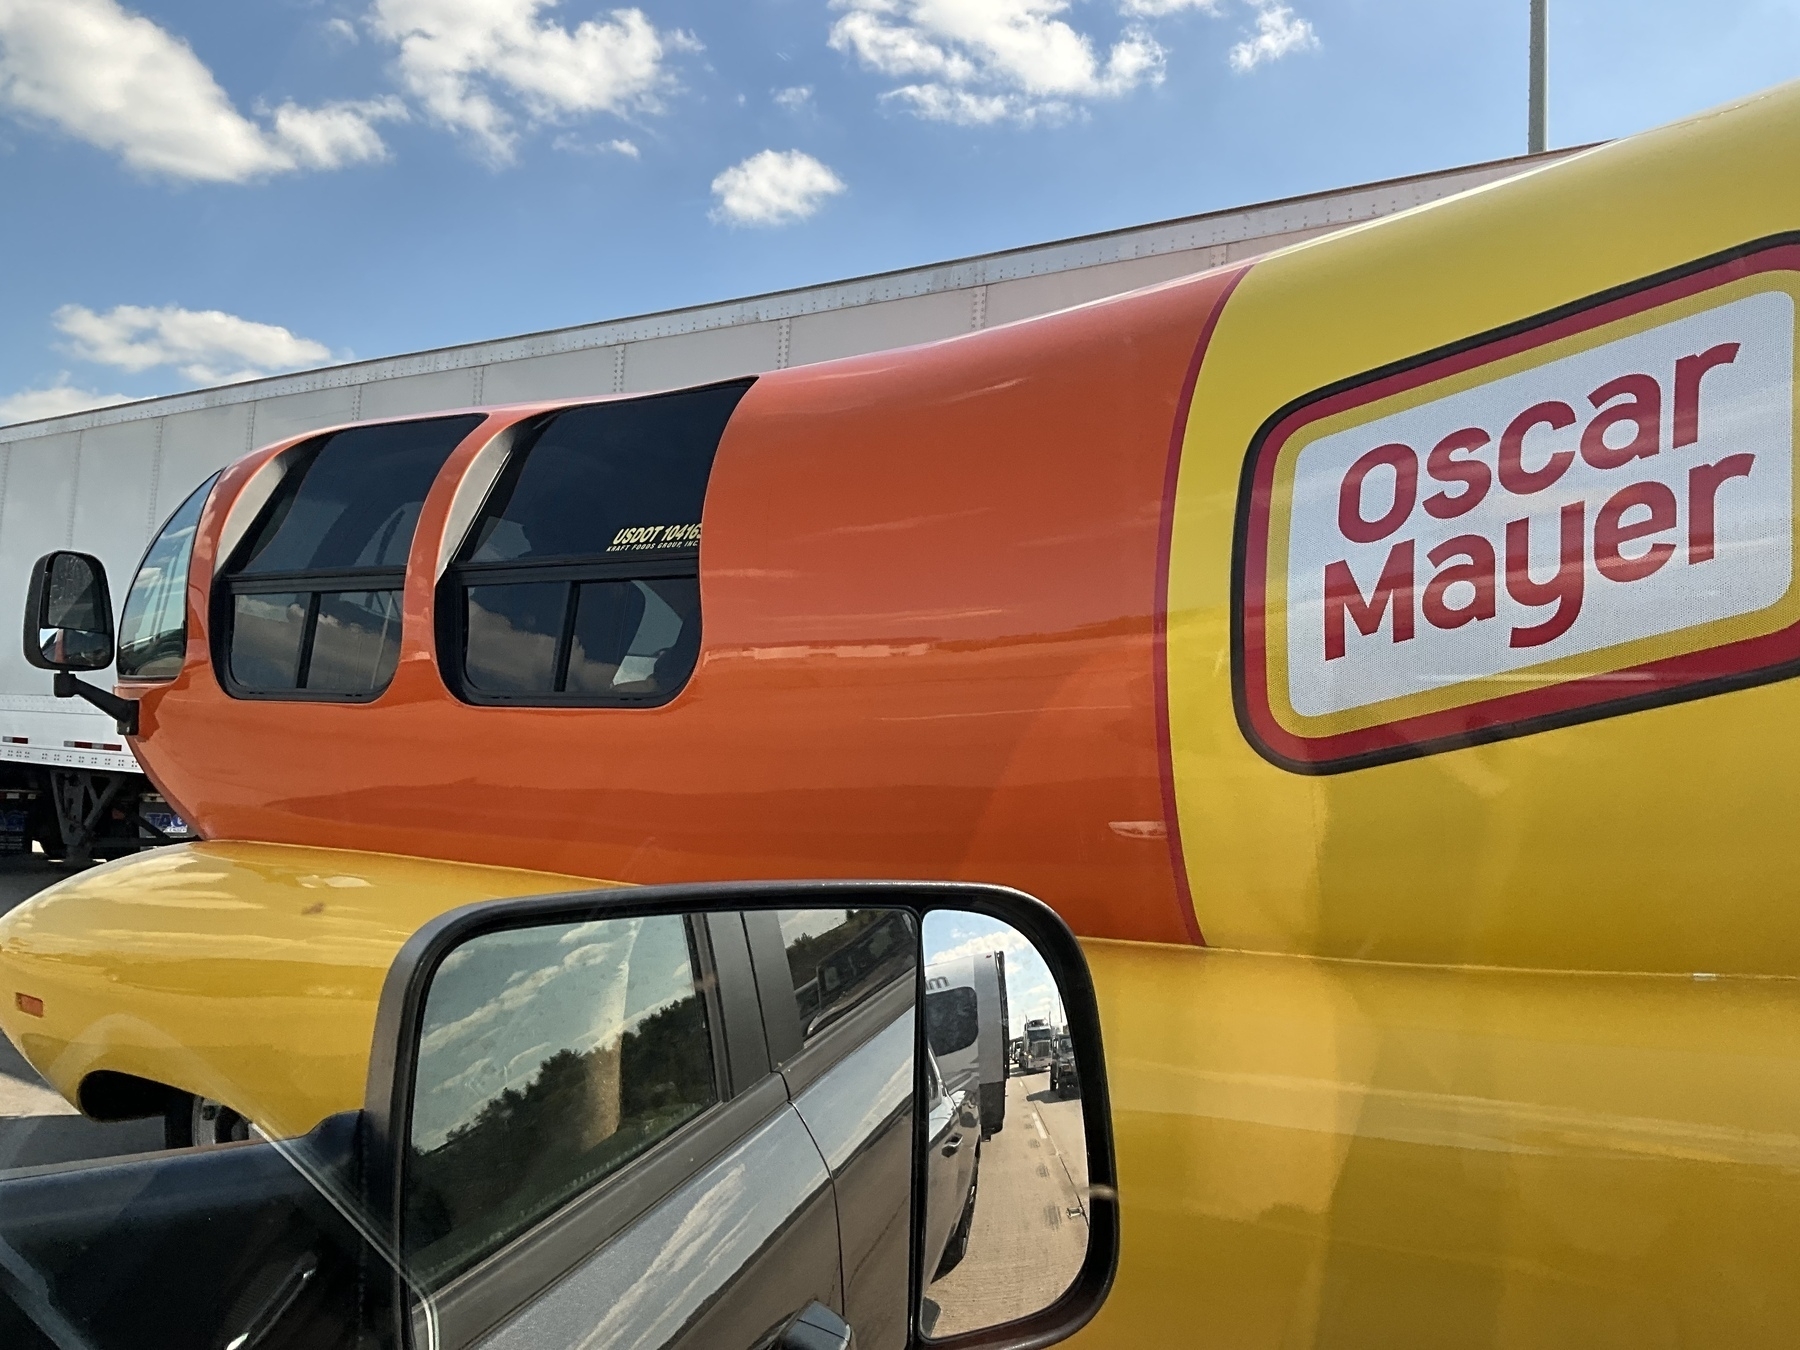 Passed by the Oscar Mayer truck